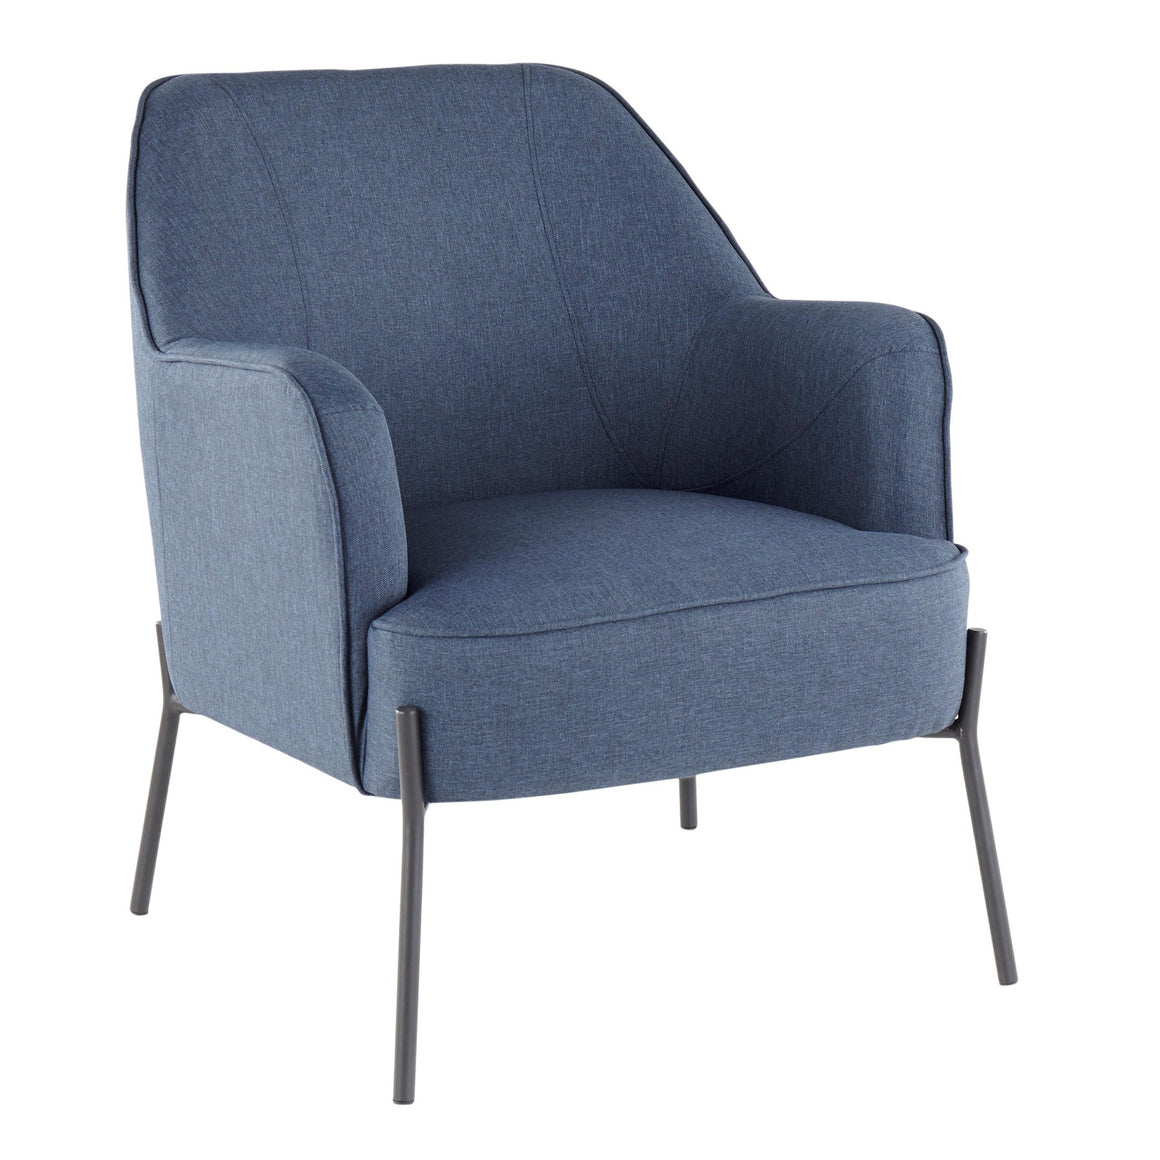 Daniella Contemporary Accent Chair in Black Metal and Blue Fabric by LumiSource